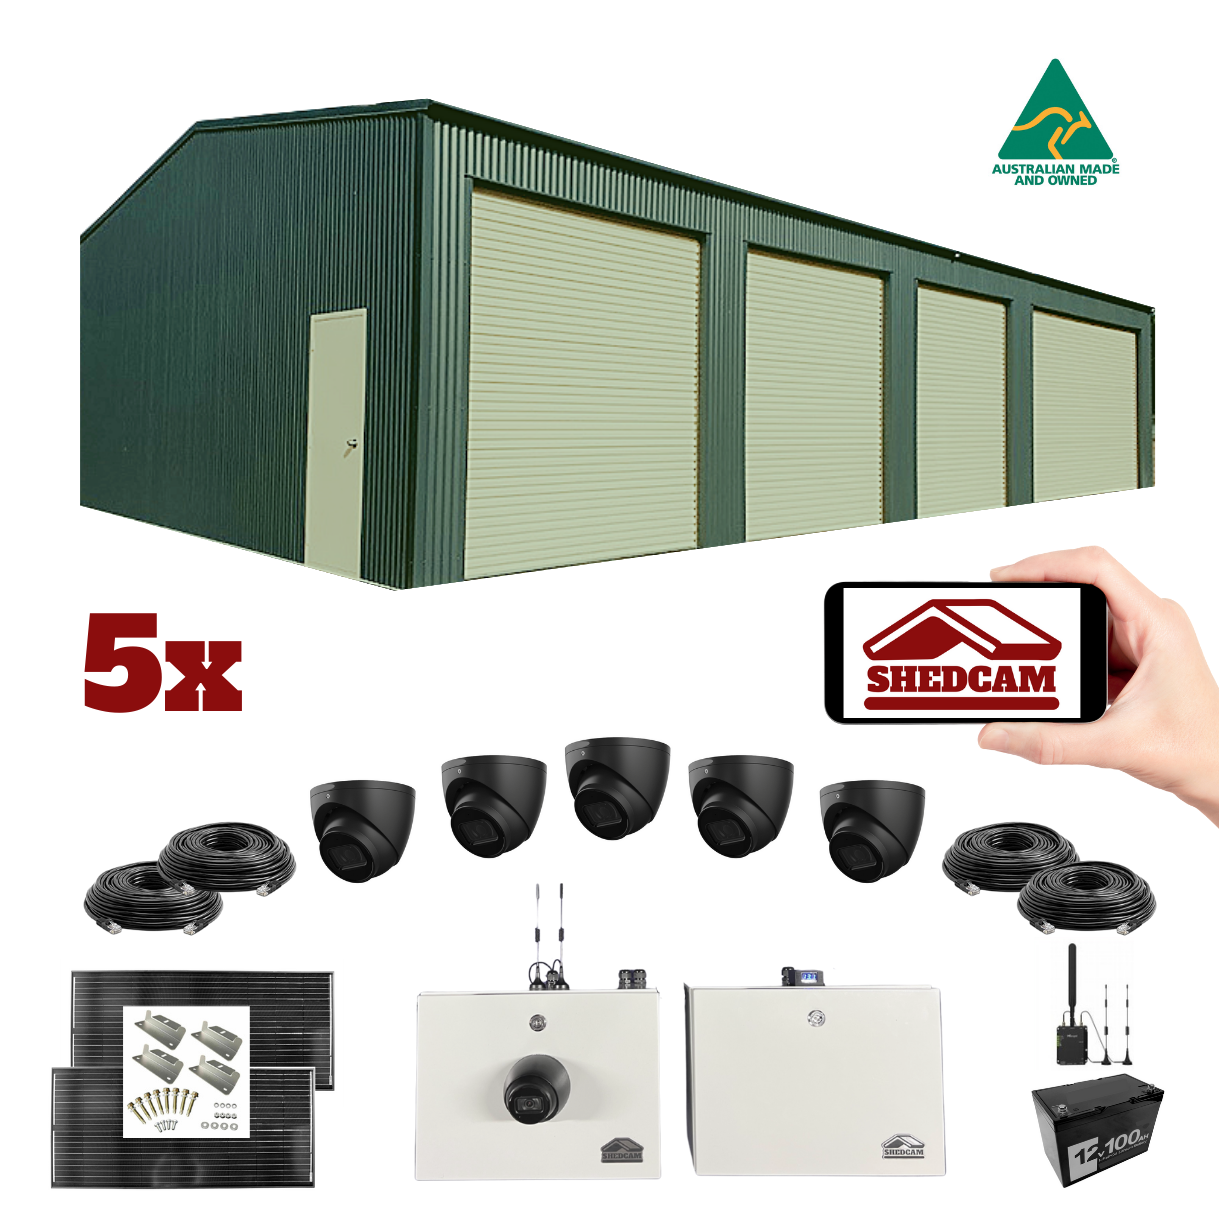 outdoor cctv camera for sheds with 4G router and solar panels